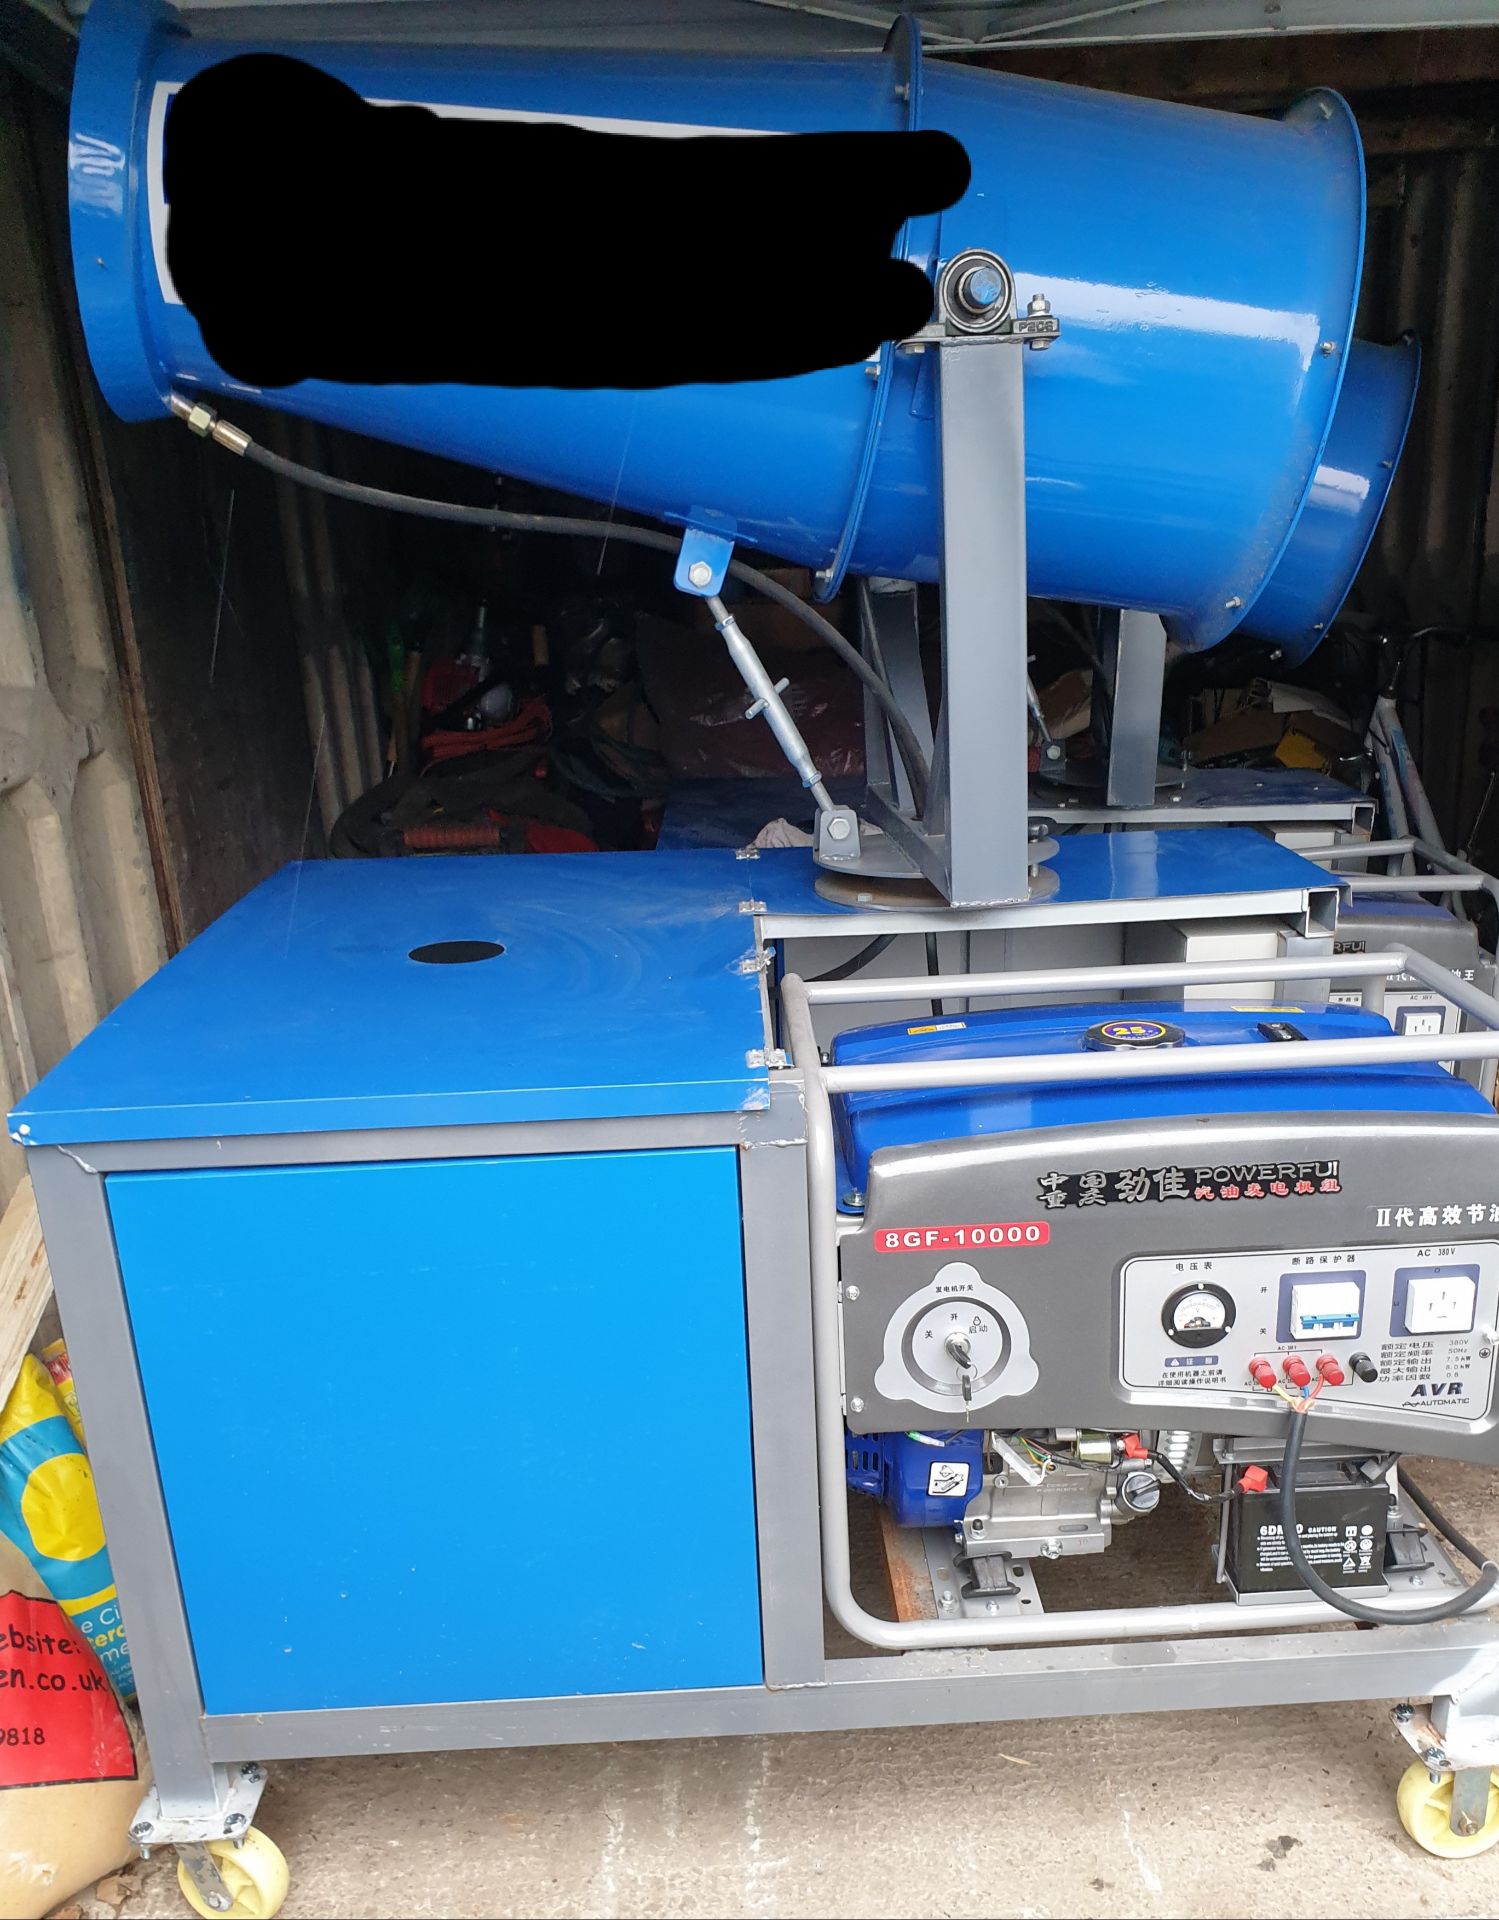 Water Cannon Dust Suppression Unit 8GF 10000 - Image 3 of 12